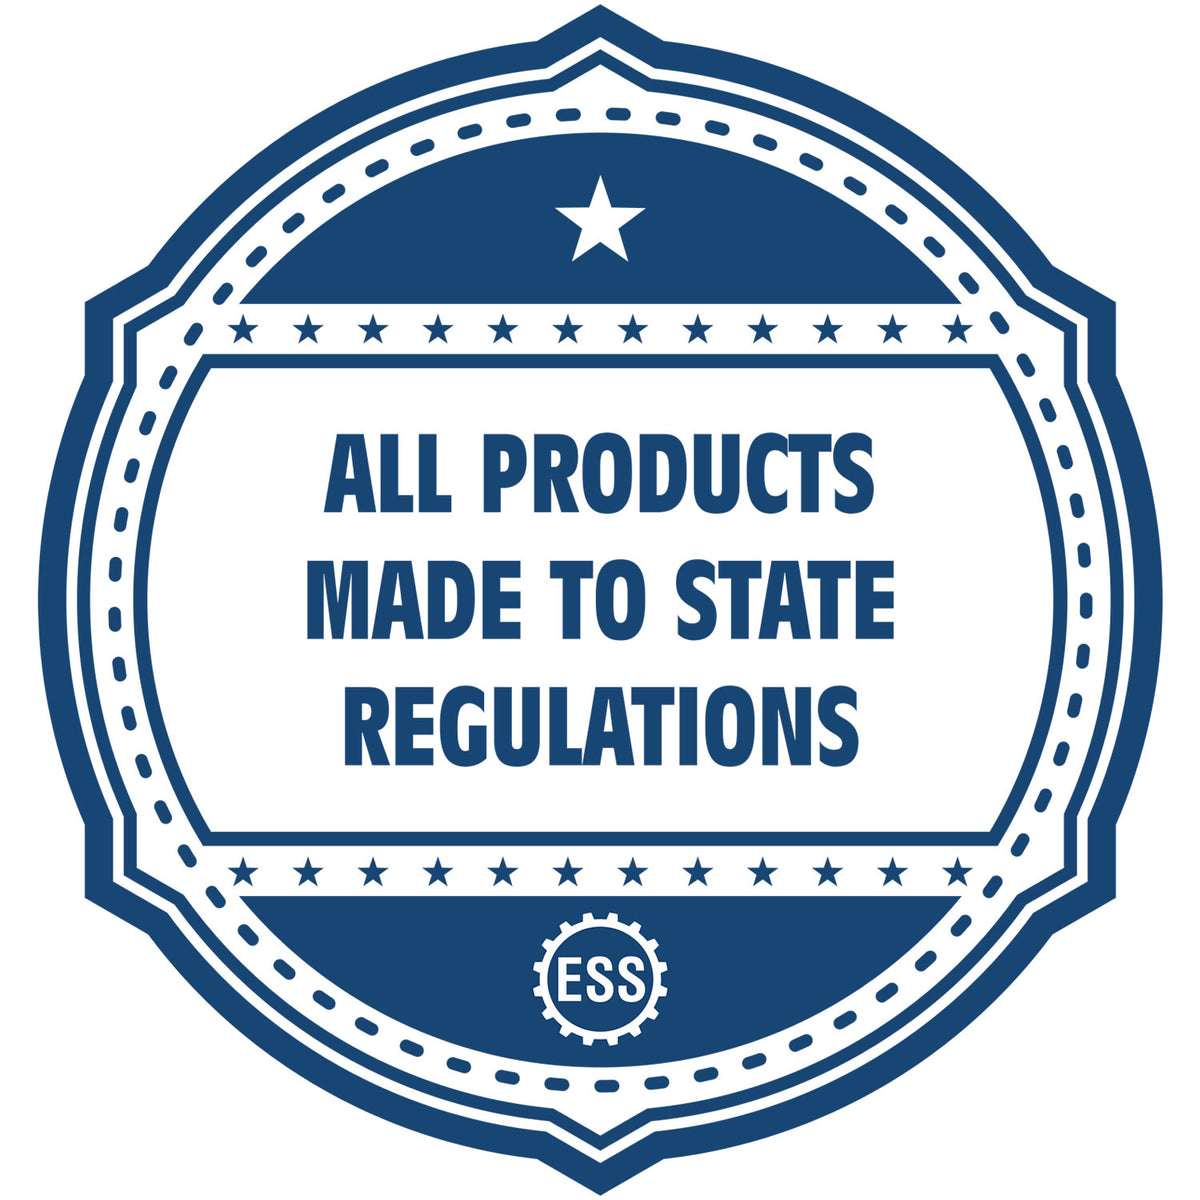 An icon or badge element for the State of Illinois Extended Long Reach Engineer Seal showing that this product is made in compliance with state regulations.